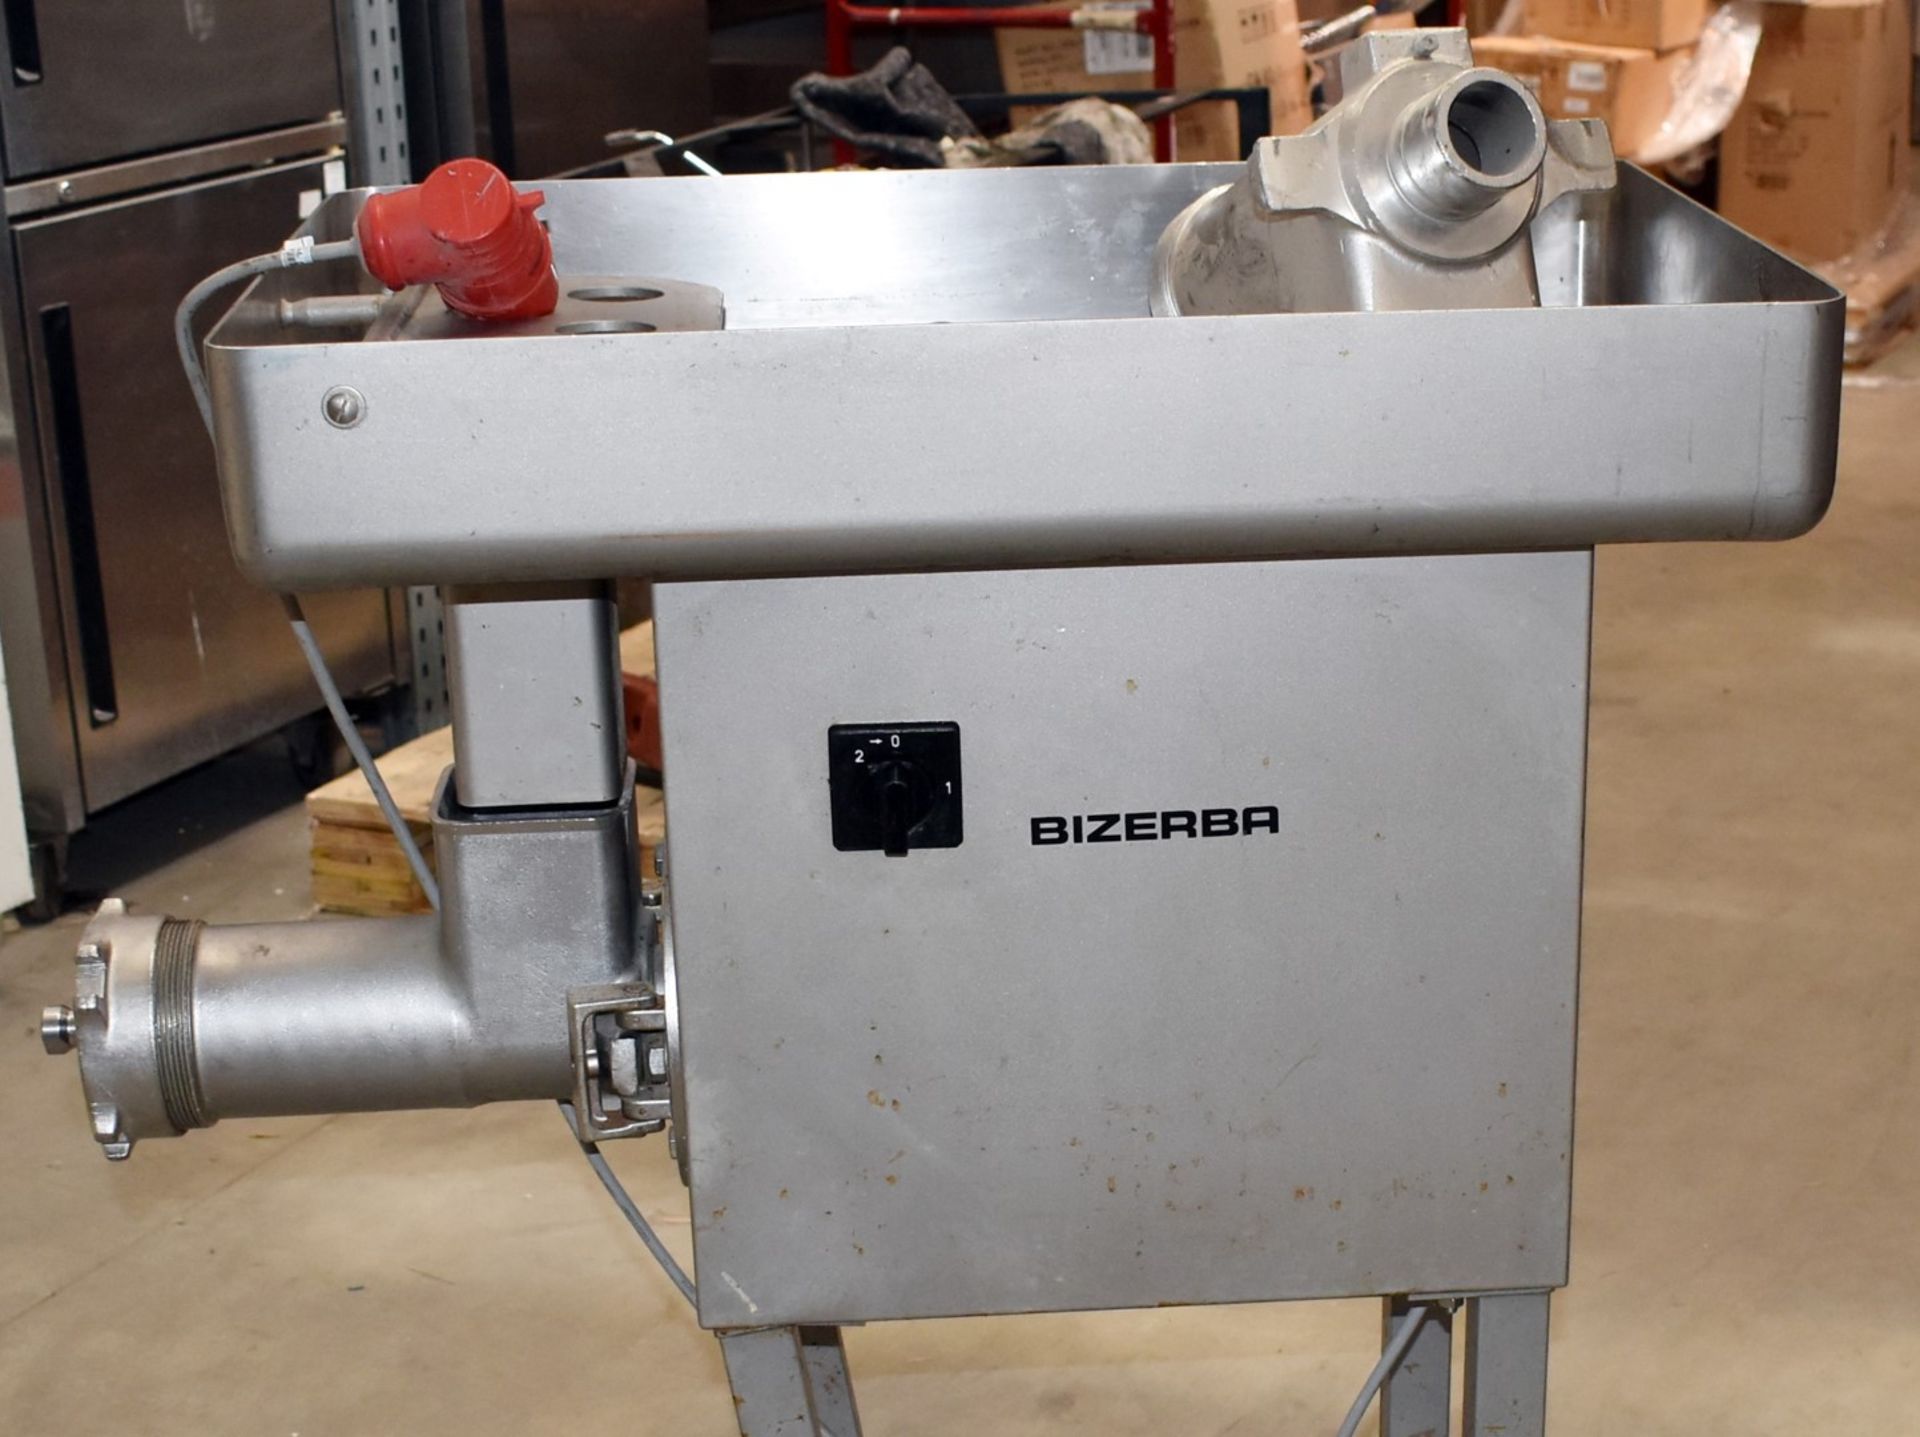 1 x Bizerba Meat Mincer - With Stand and Various Accessories - Model FW-N32S/2 - 3 Phase - Image 14 of 14